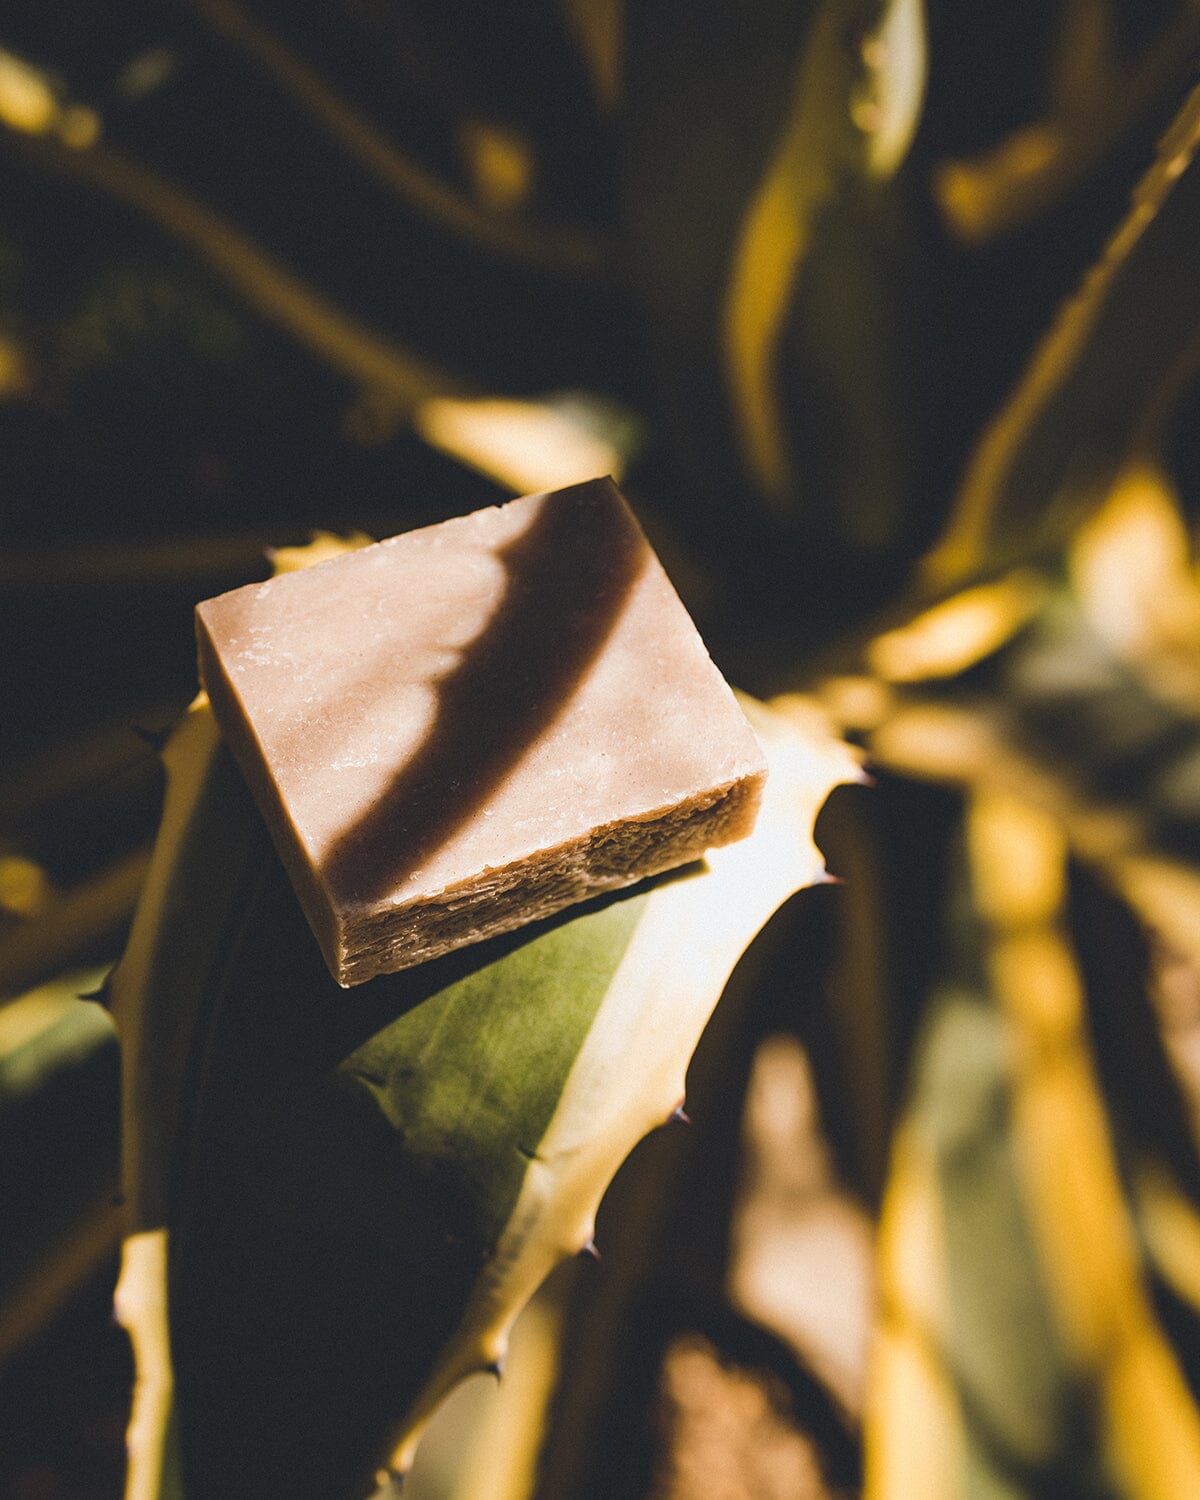 An all-natural soap bar made with Aloe Vera and Rhassoul Clay placed on a succulent leaf in the shade.